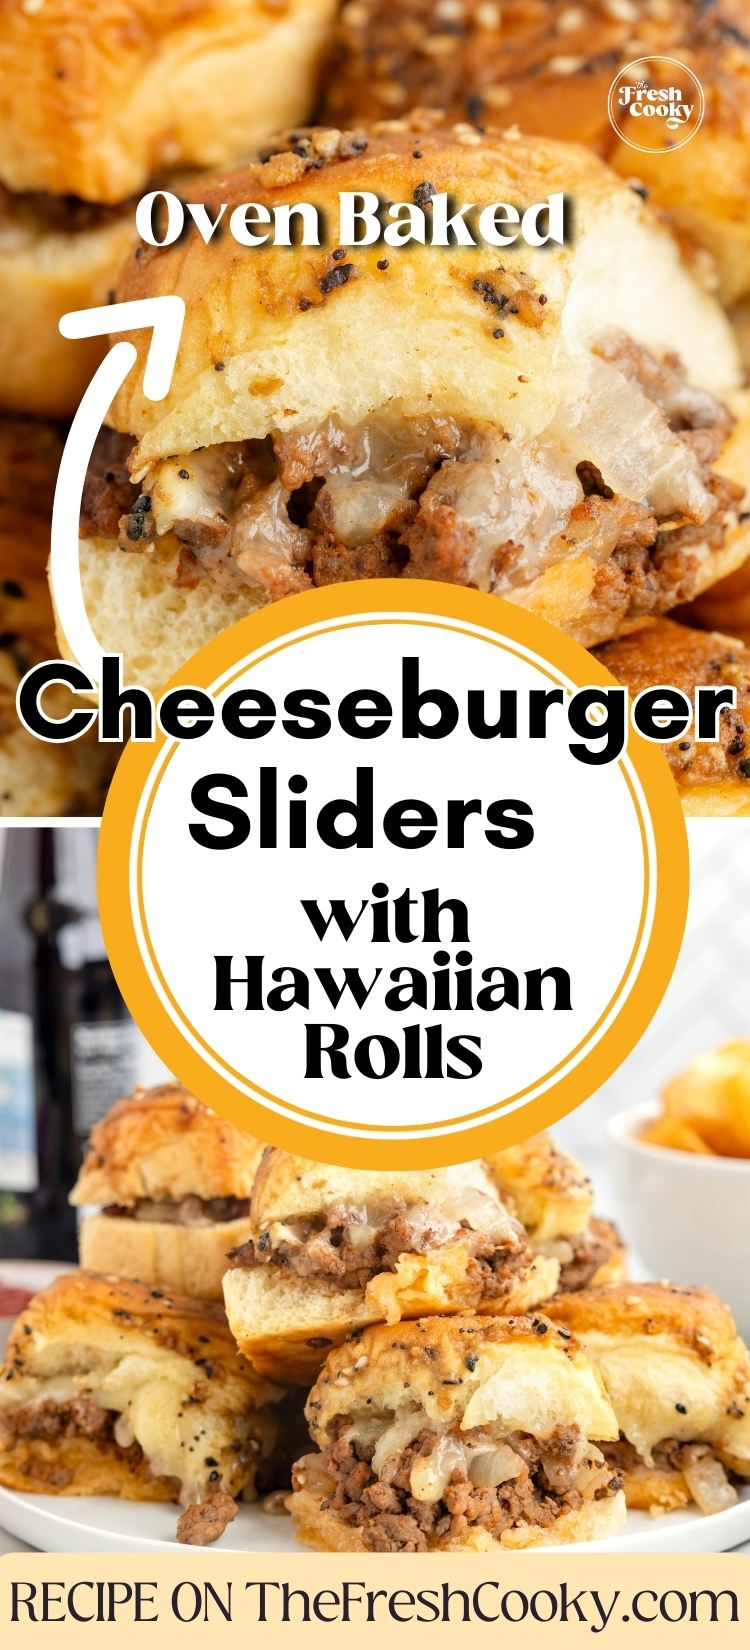 Oven baked cheeseburger slider, and plate of sliders on Hawaiian rolls.